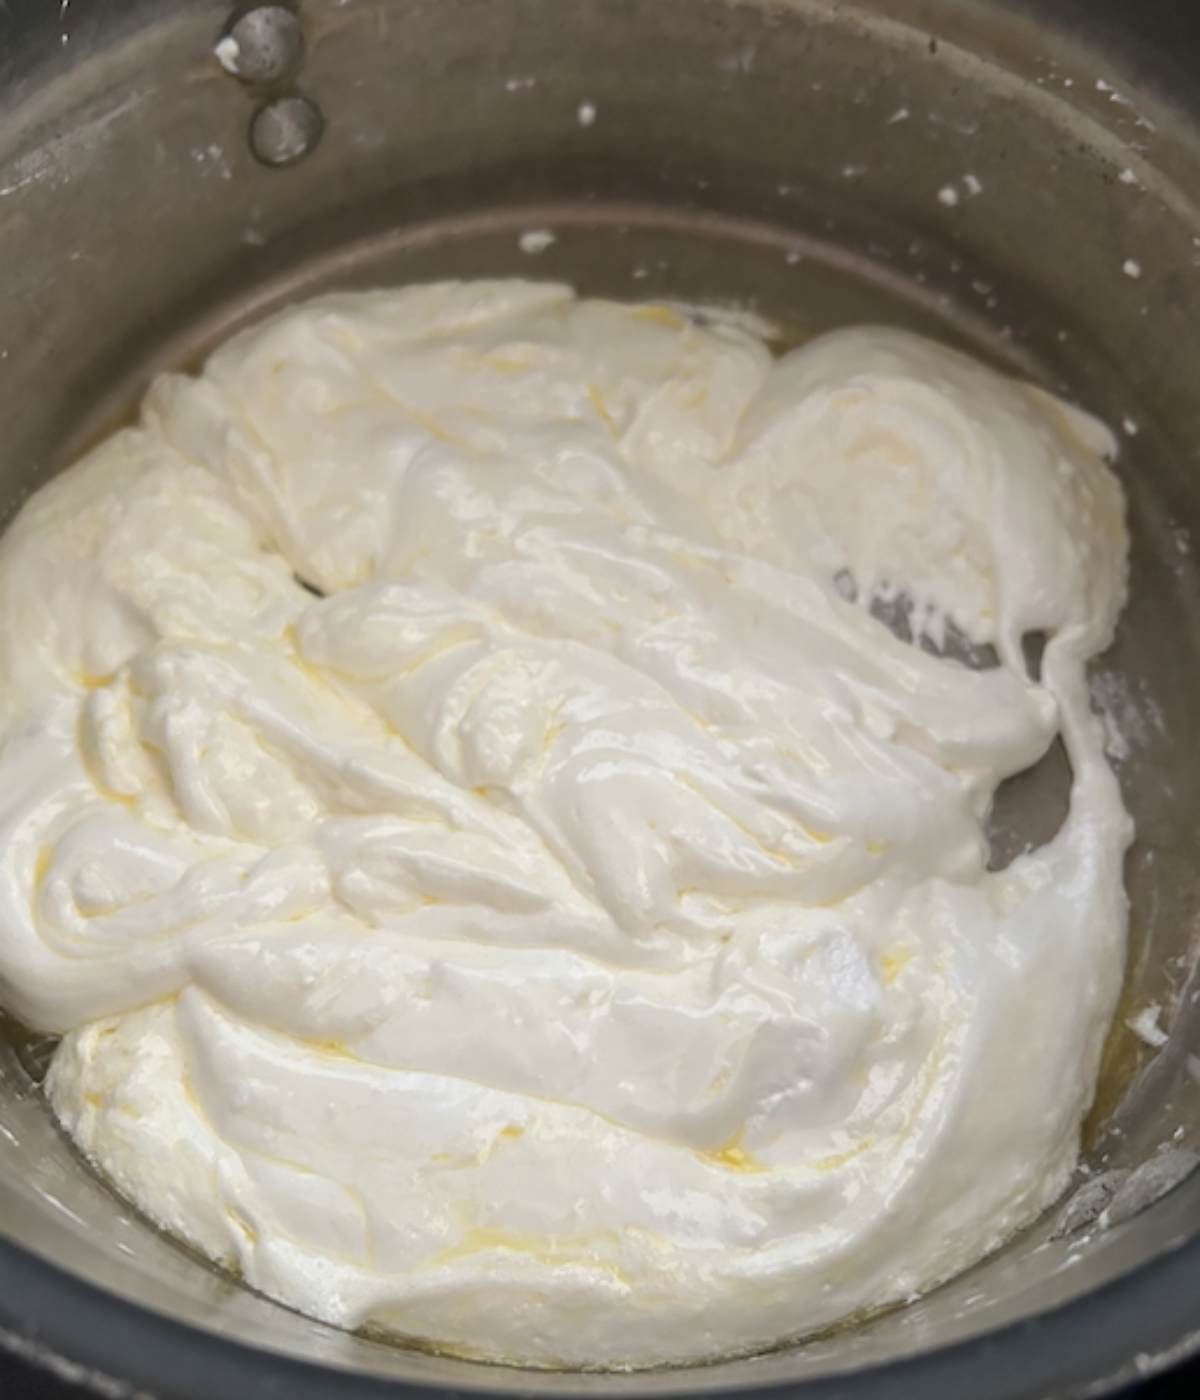 Marshmallow cream fluff in pot with butter.